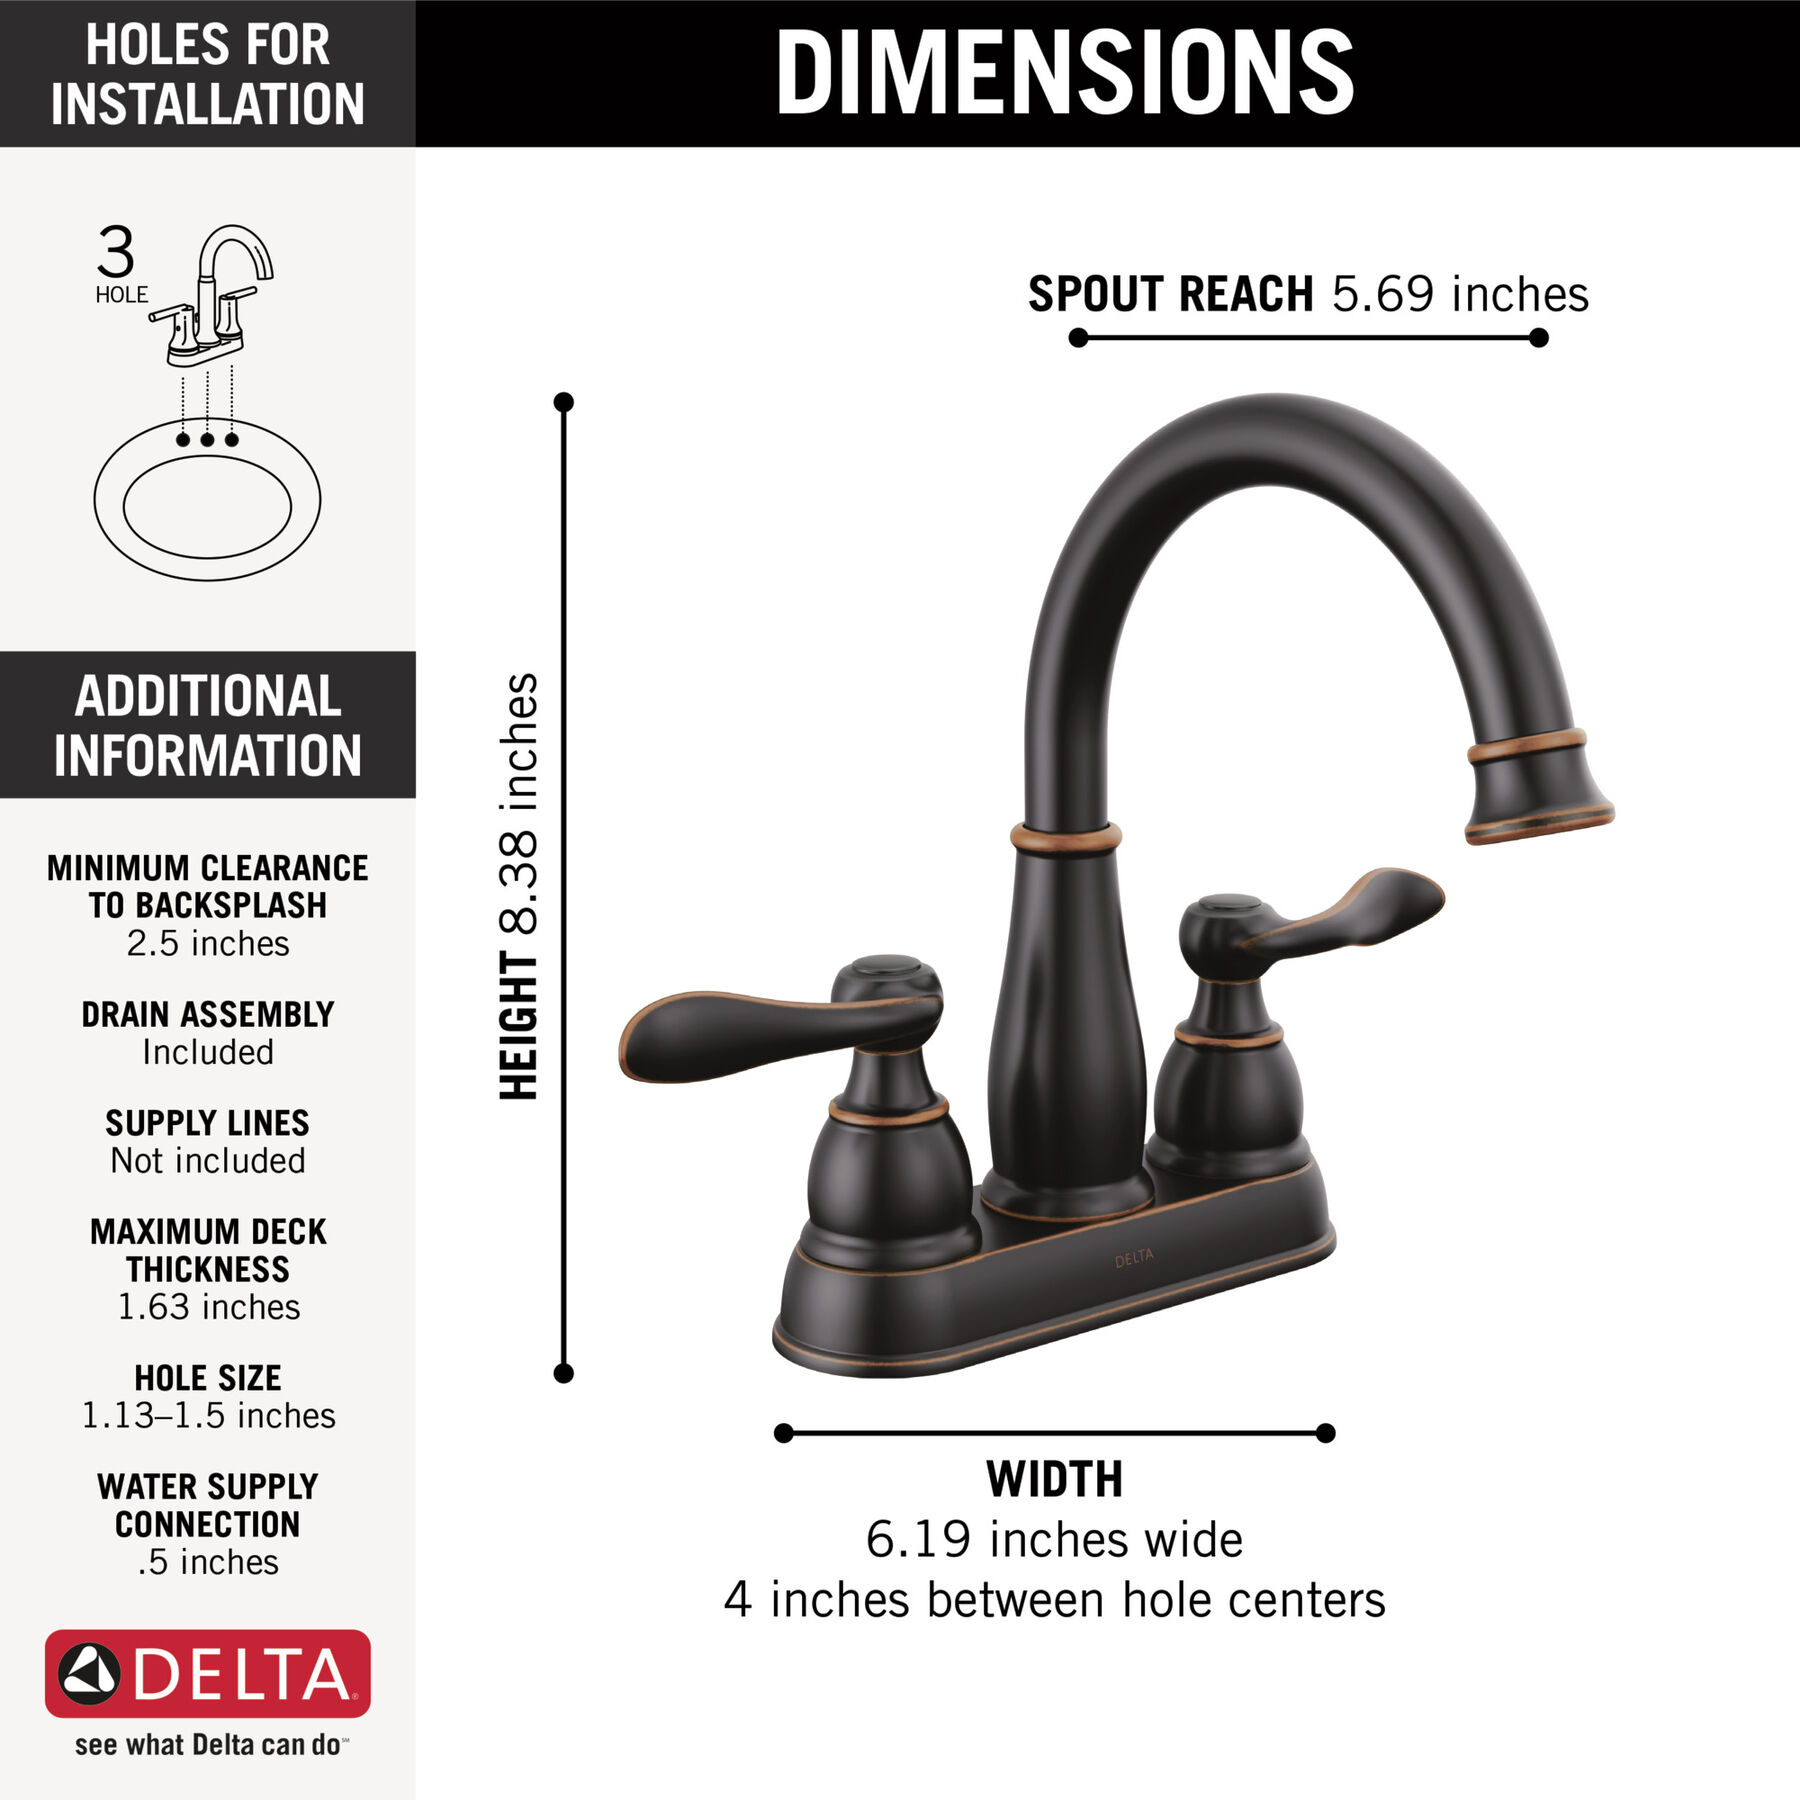 Aspirations™ 8-Inch Widespread 2-Handle Bathroom Faucet 1.2 gpm/4.5 L/min  With Lever Handles